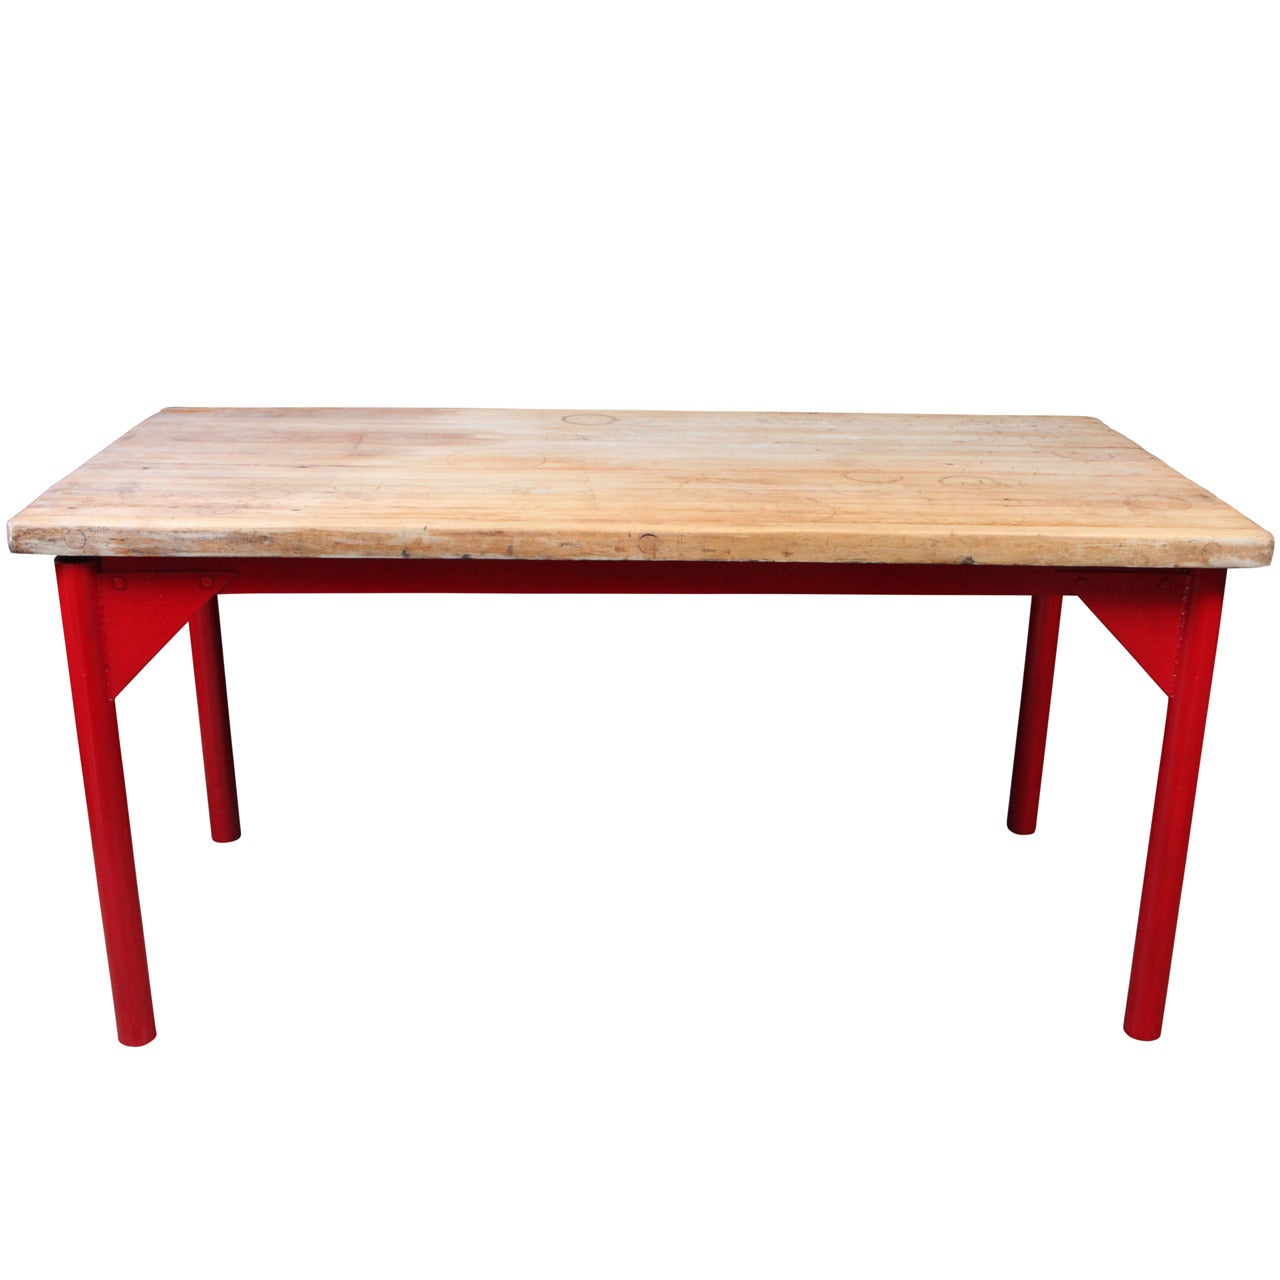 Butcher Block Restaurant Prep Table with Painted Metal Legs